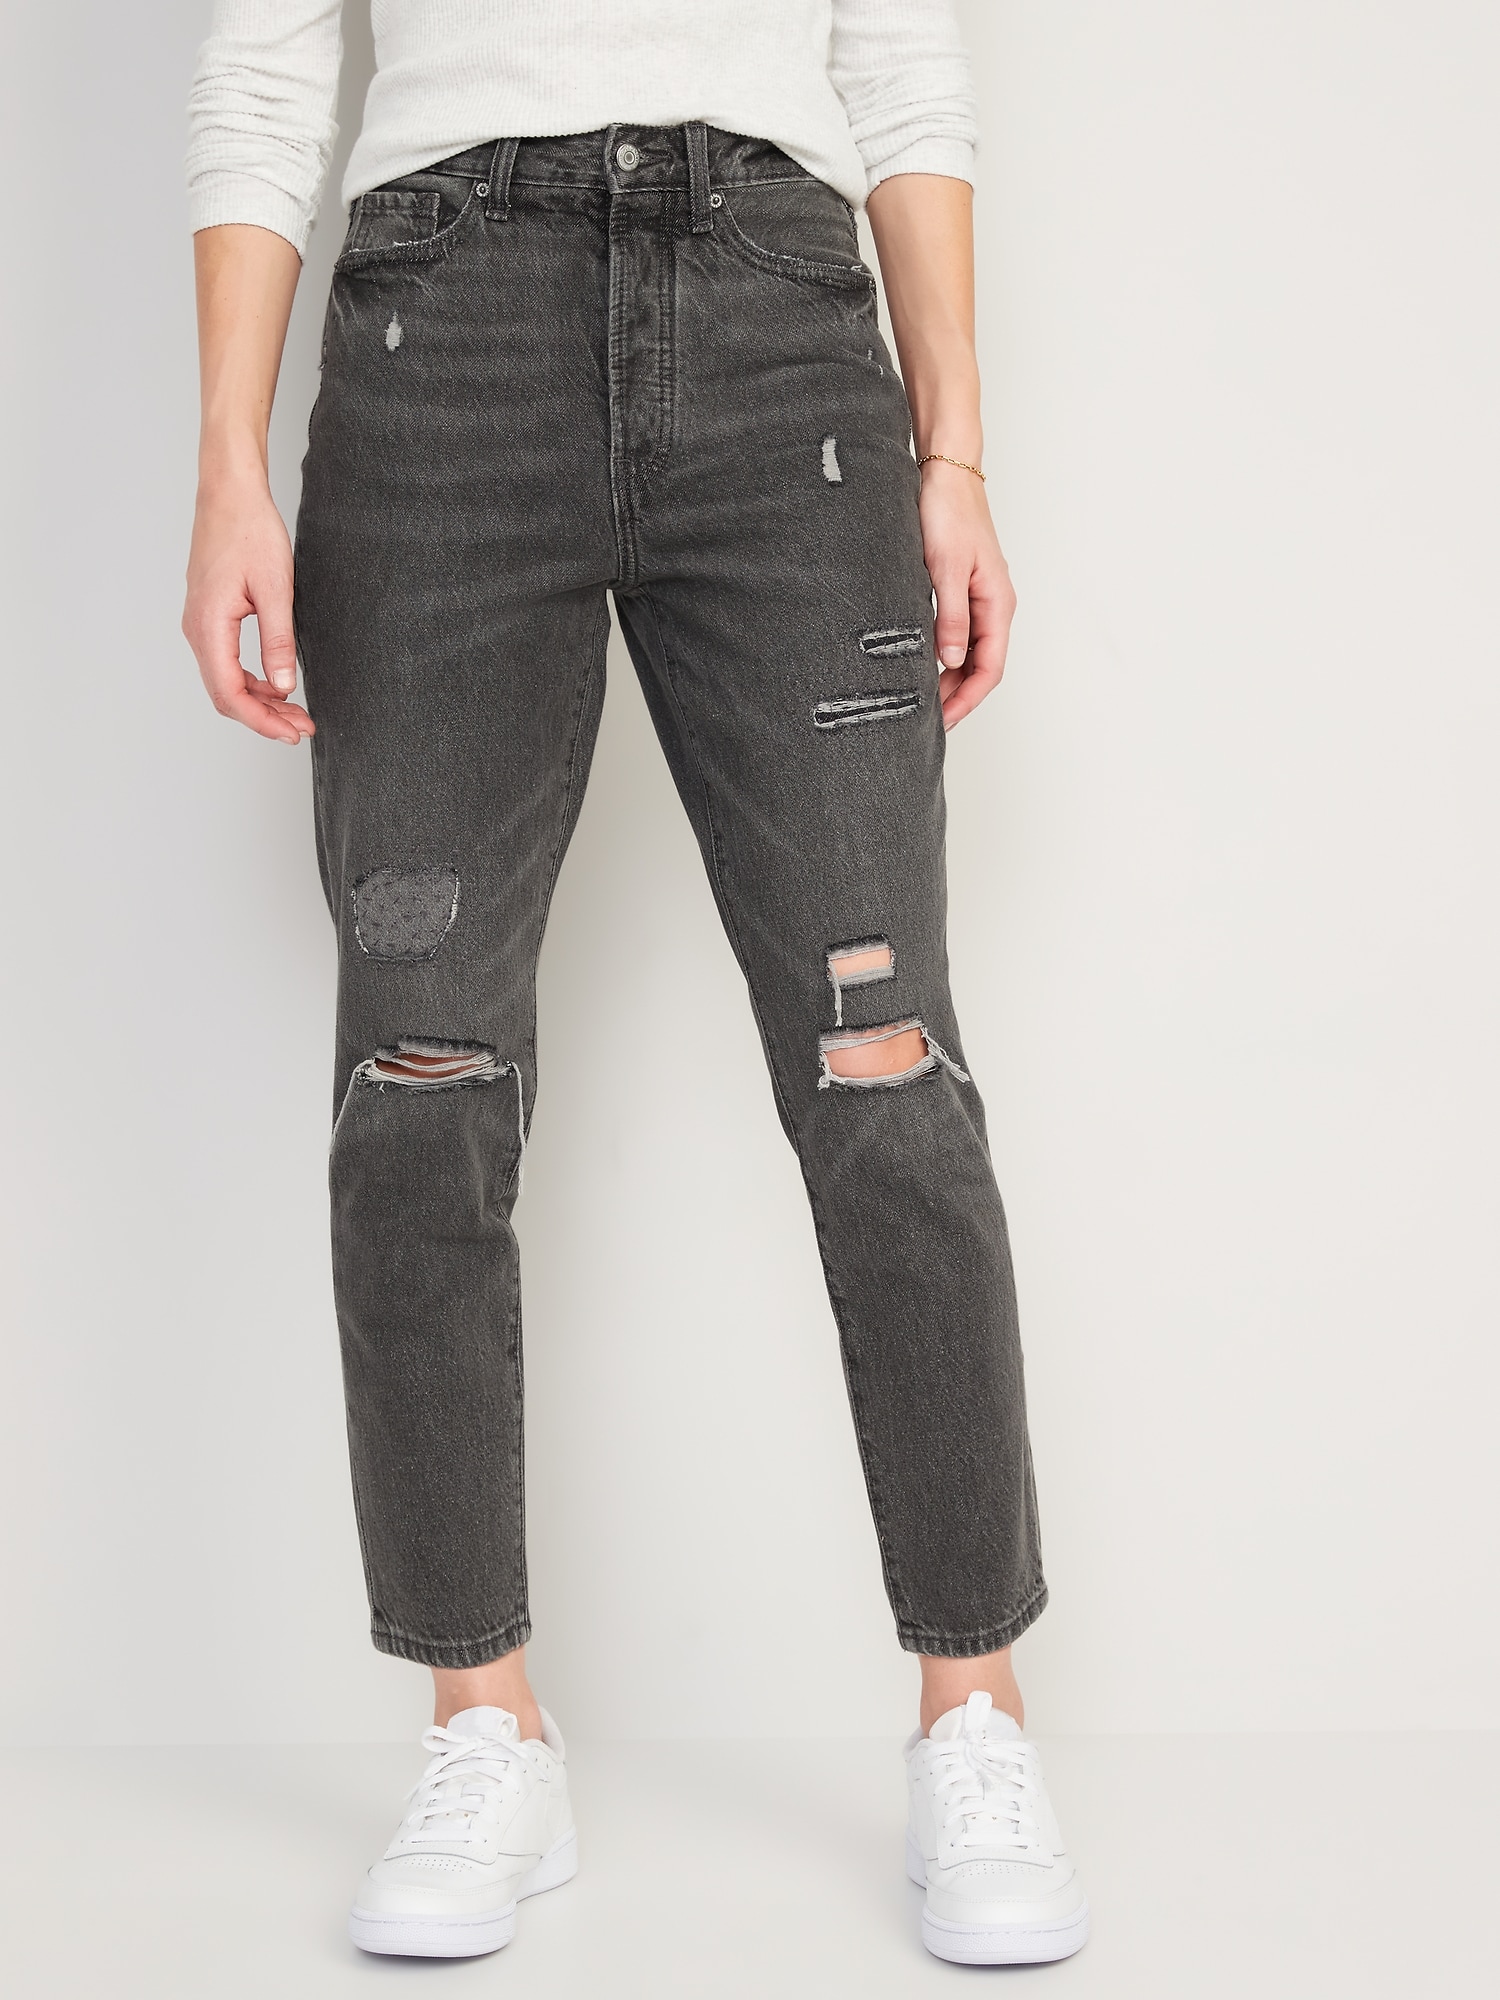 Higher High-Waisted Button-Fly O.G. Straight Ripped Gray Non-Stretch Jeans for Women